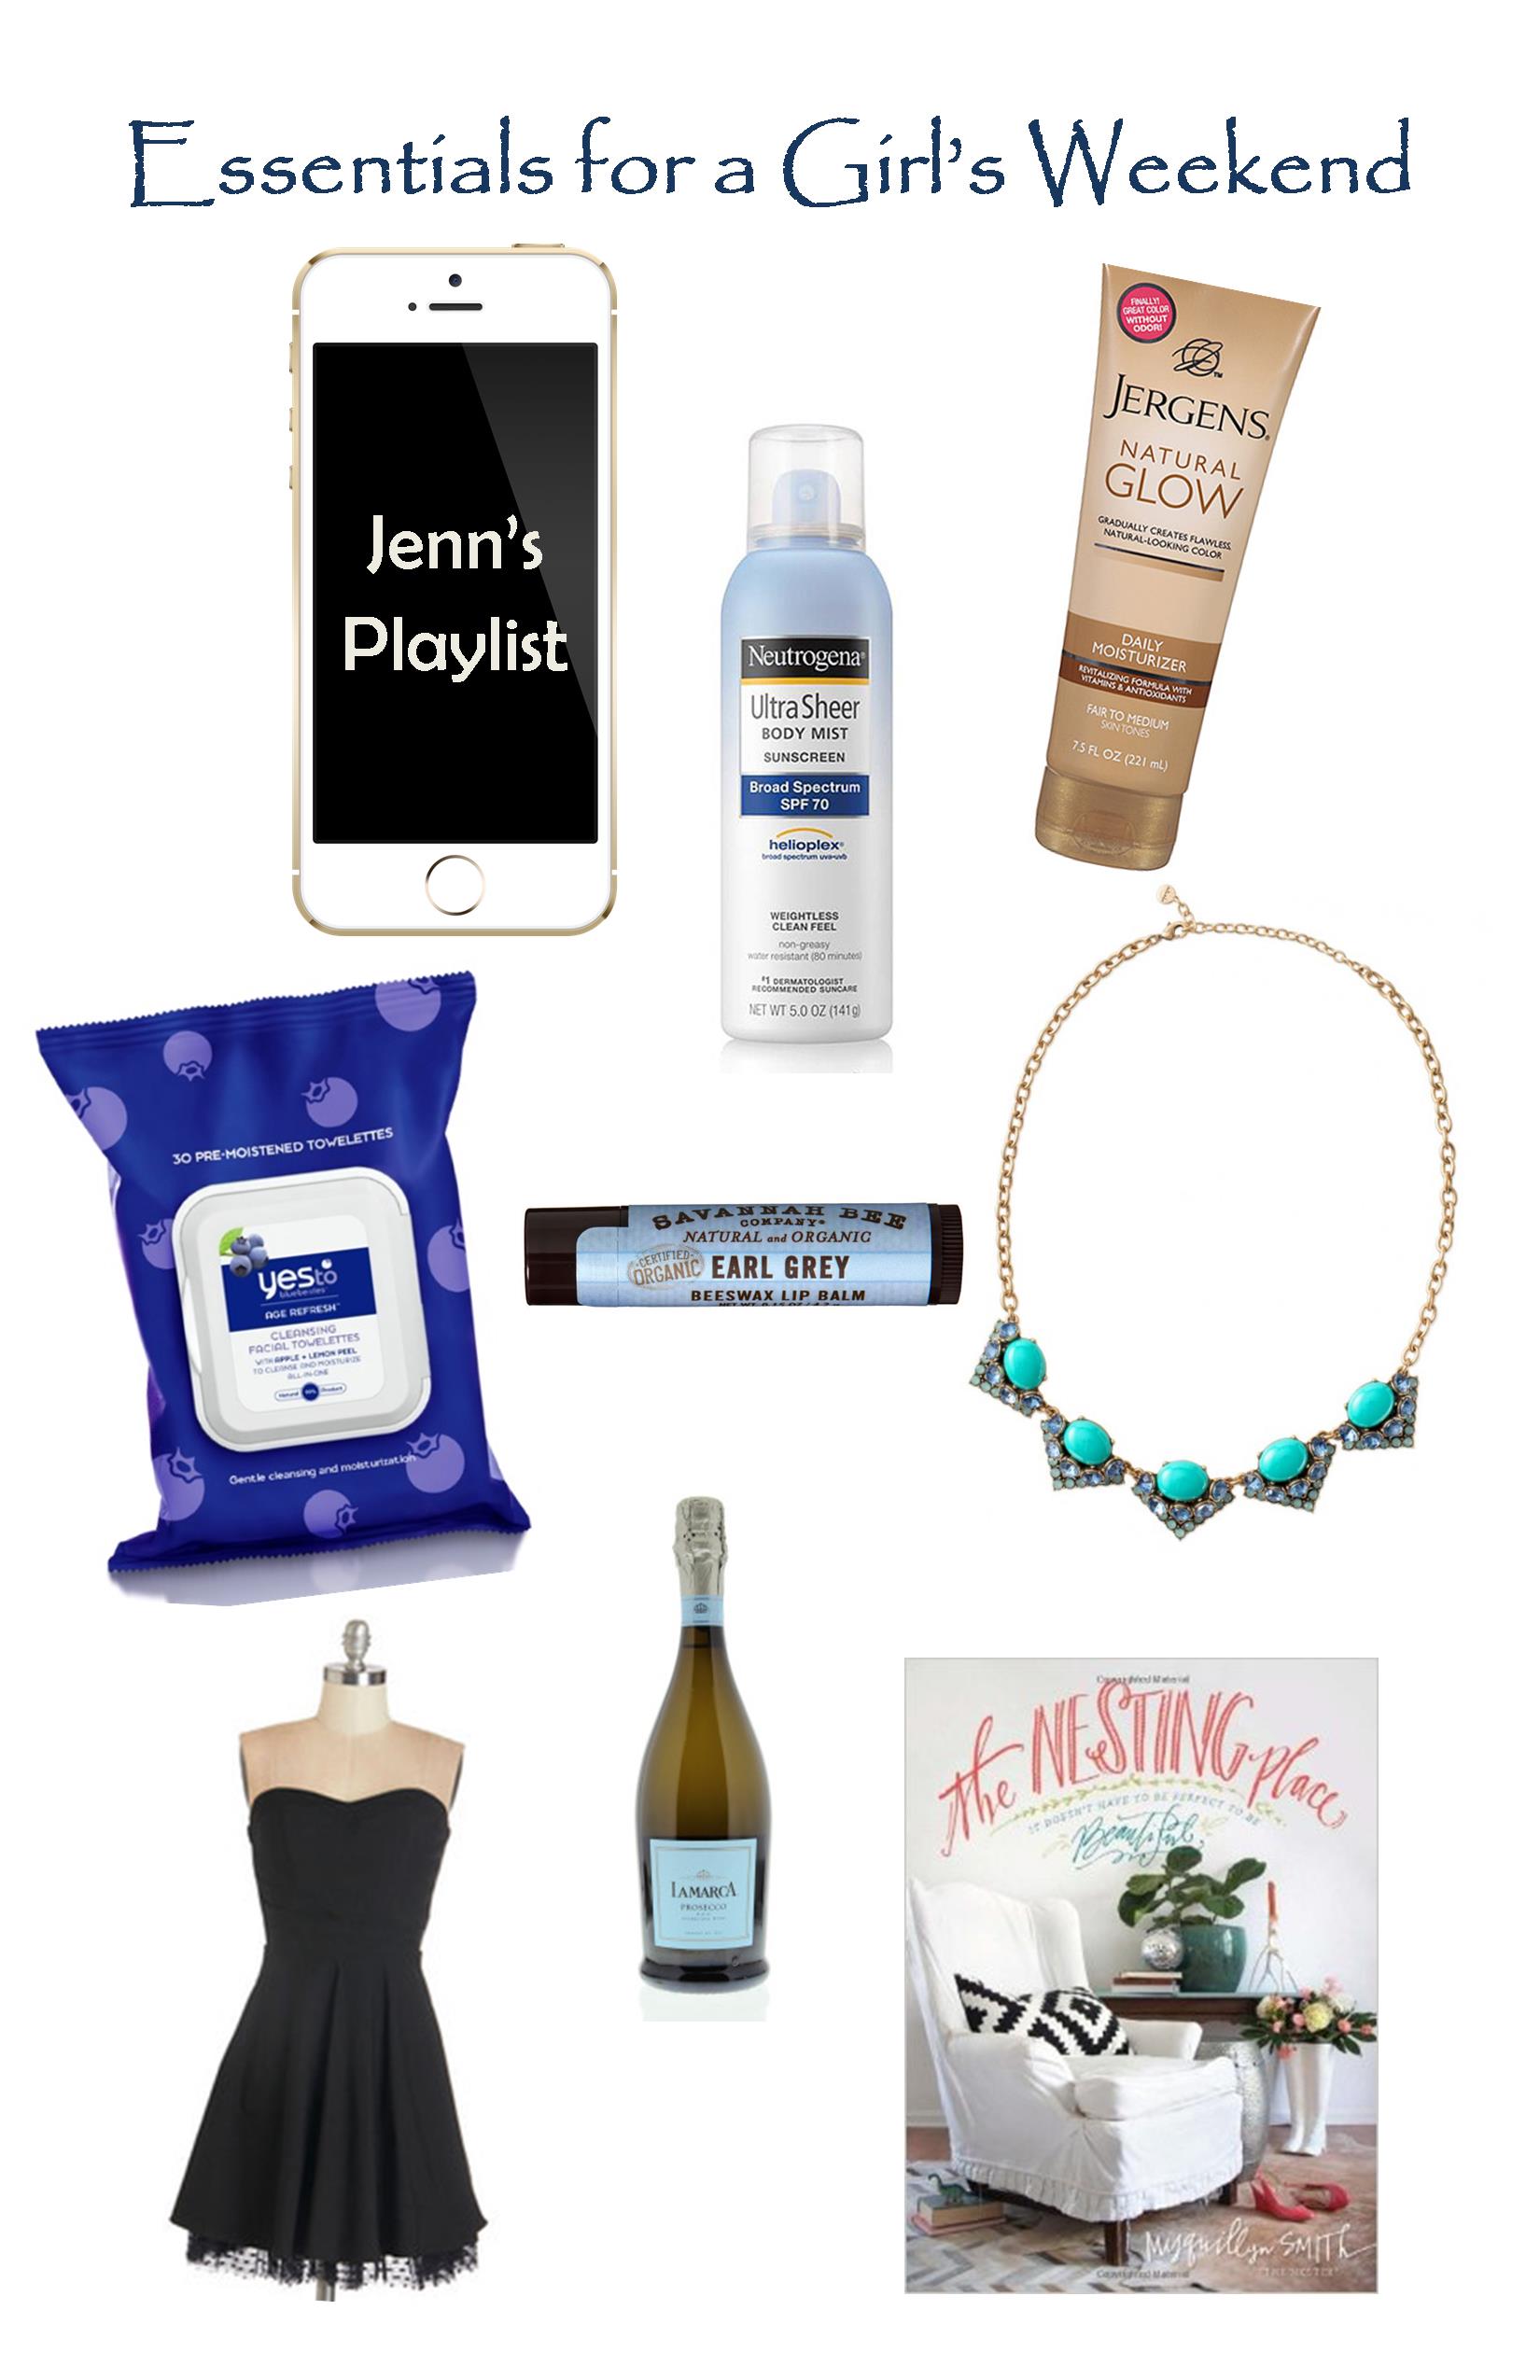 Essentials for a Girl's Weekend - Makeup Wipes, Cocktail Dress, Prosecco, Lip Balm, Acessories, The Nesting Place book, Sunscreen, Perfect Playlist